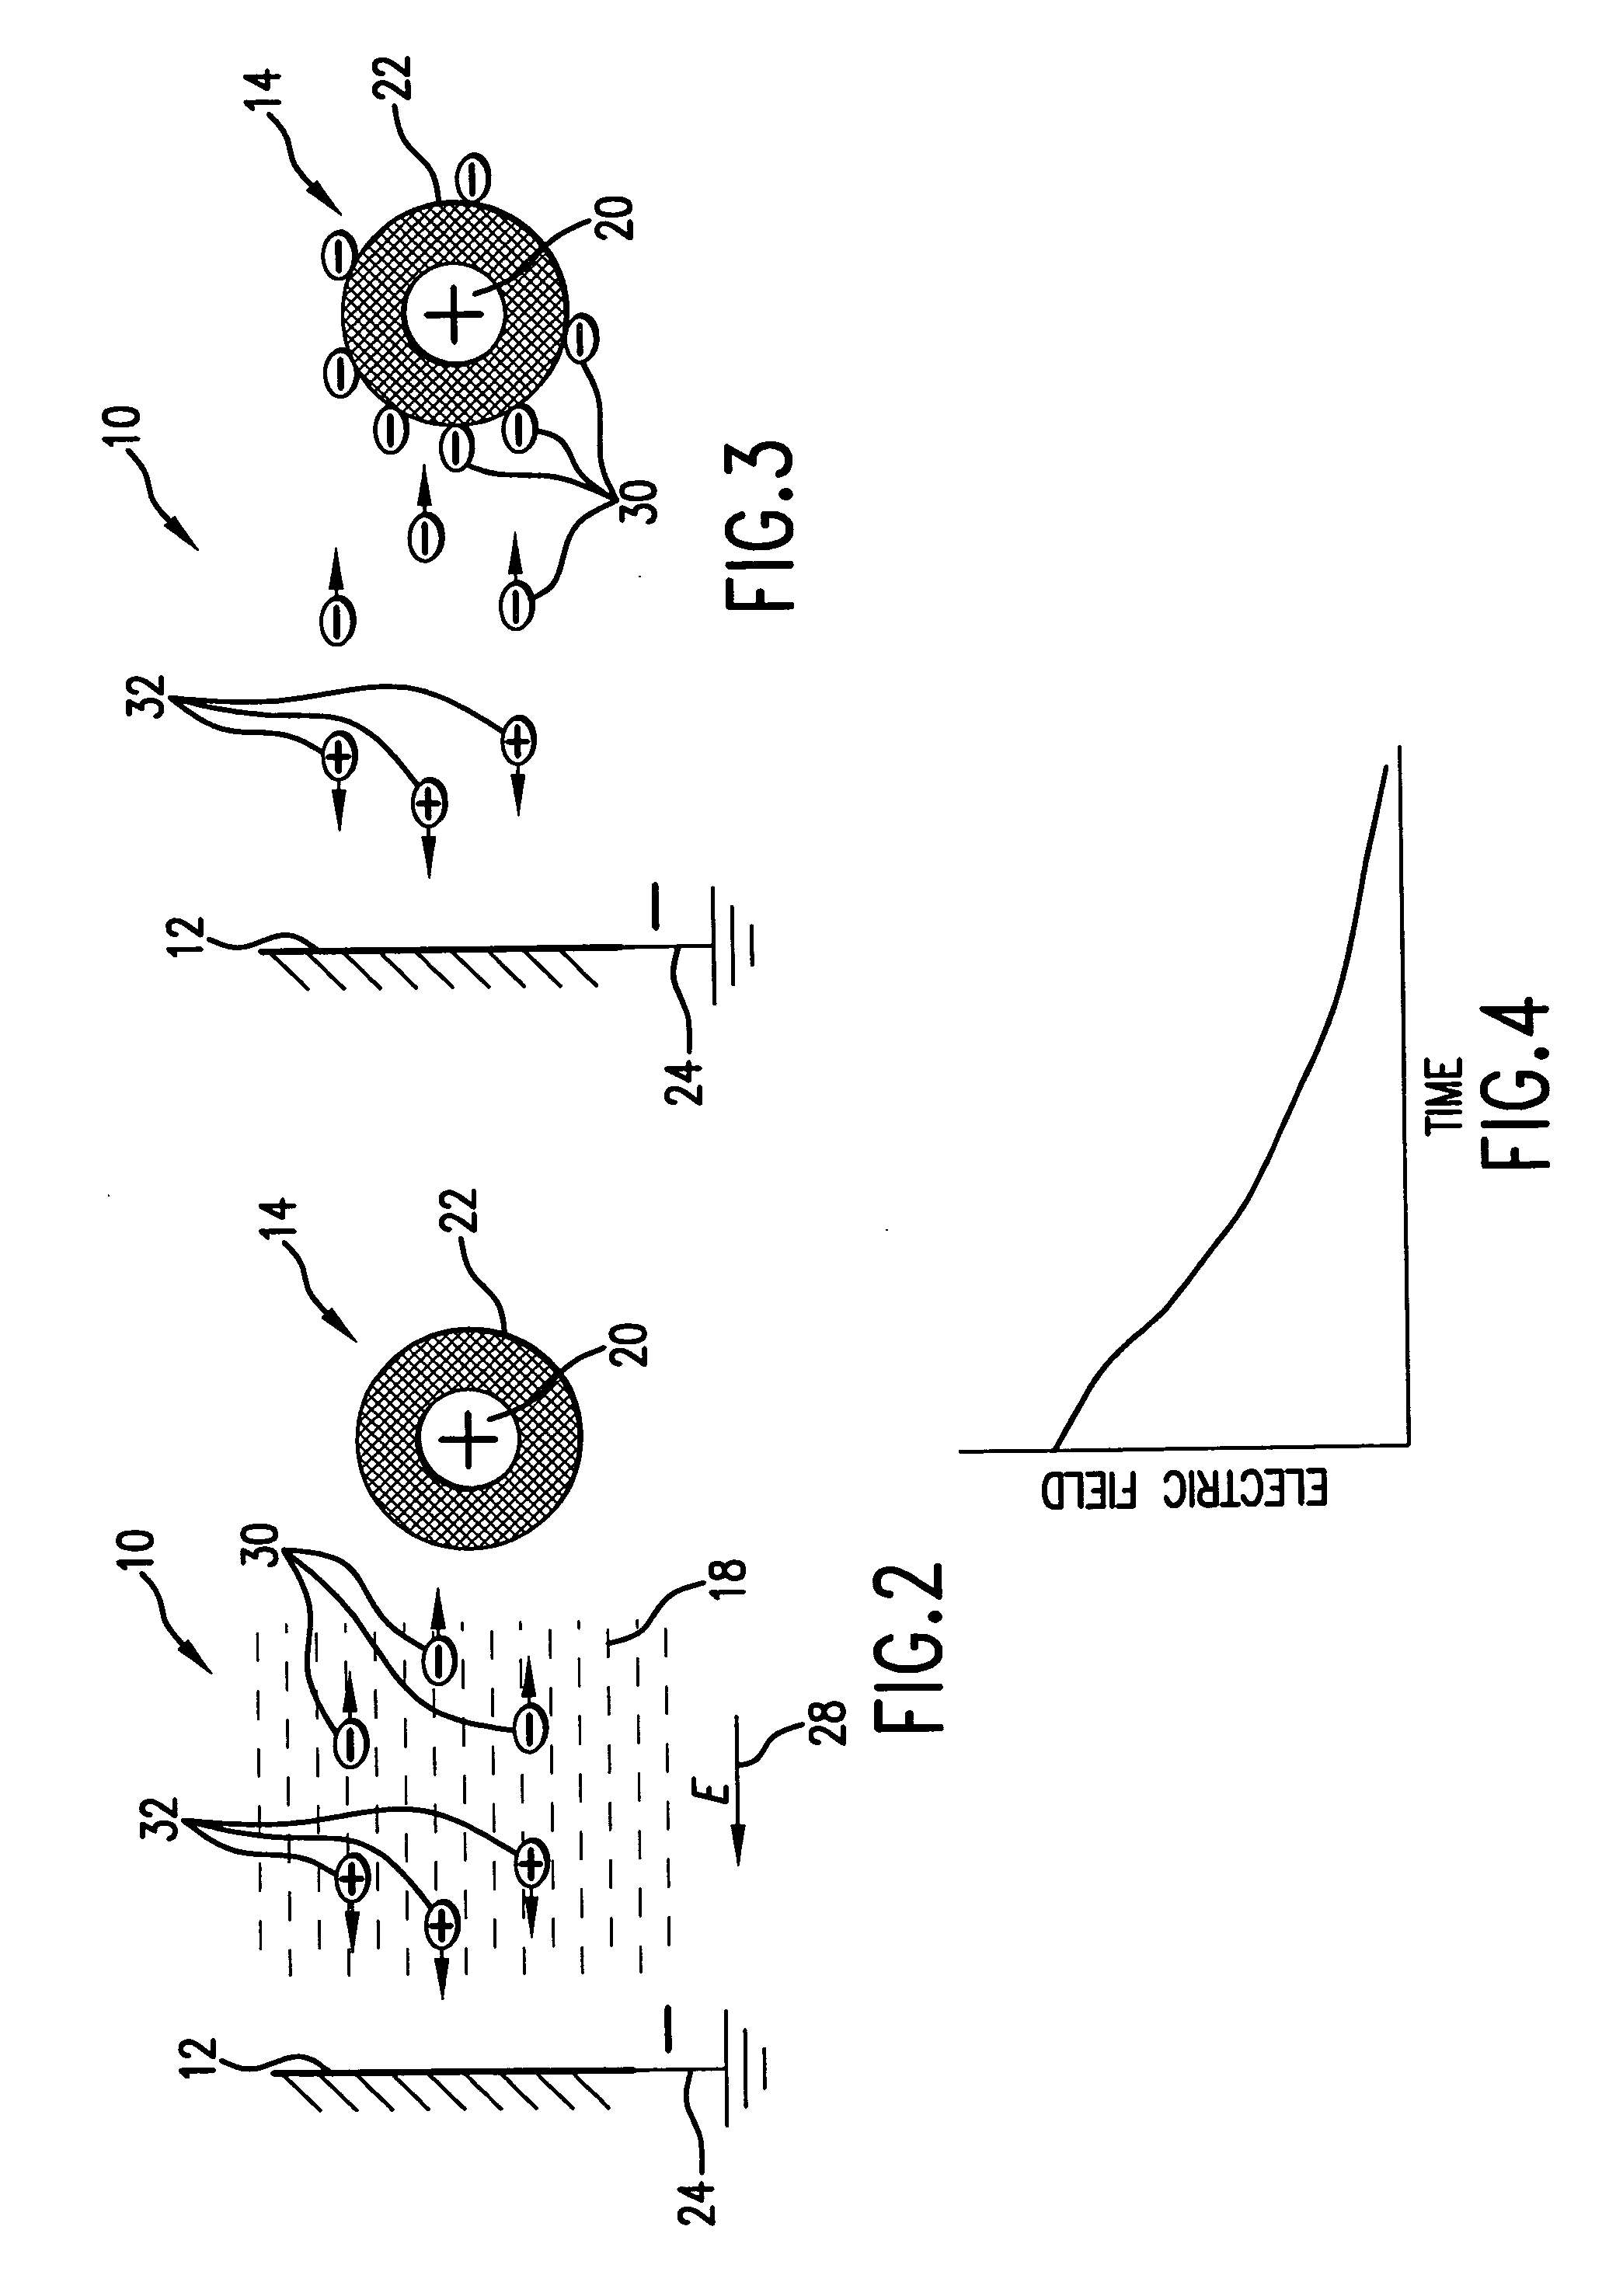 Electrohydrodynamically (EHD) enhanced heat transfer system and method with an encapsulated electrode